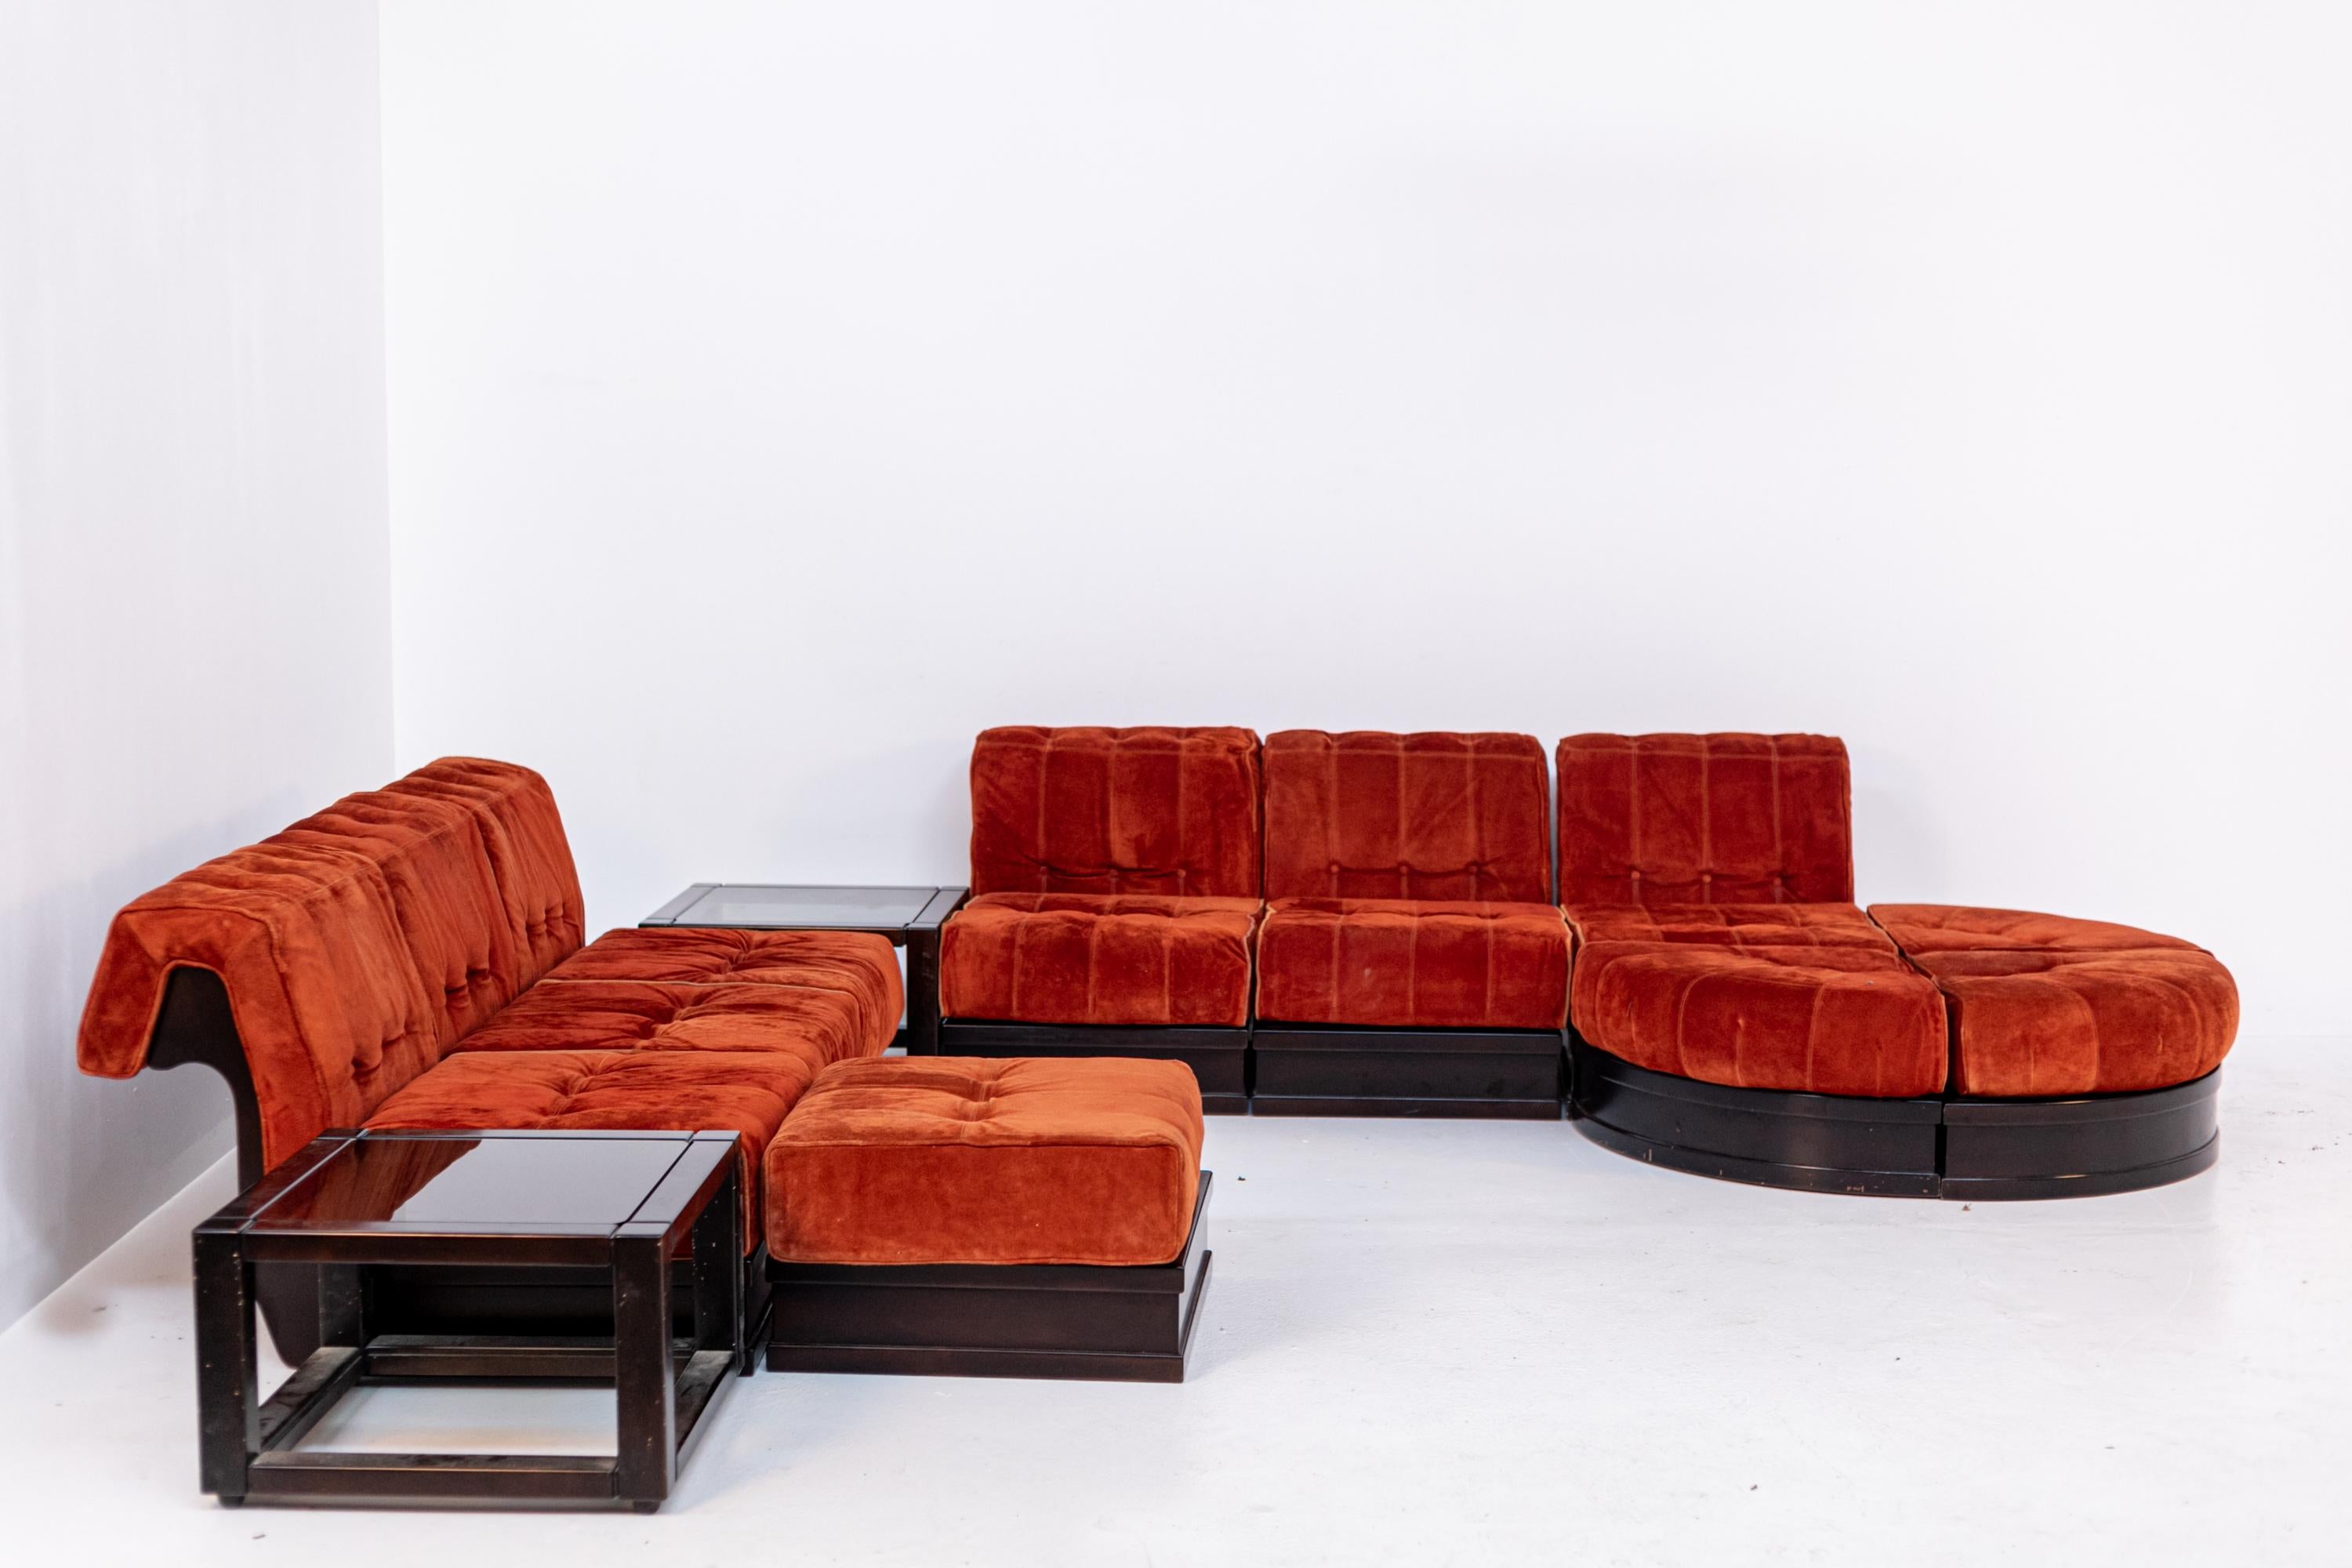 Large corner sofa by Luciano Frigerio of the 60's model Can Can. The large sofa is made of armchair and modules so its composition can be transformed continuously in any version we want to compose it. In this picture we see the sofa is in its corner